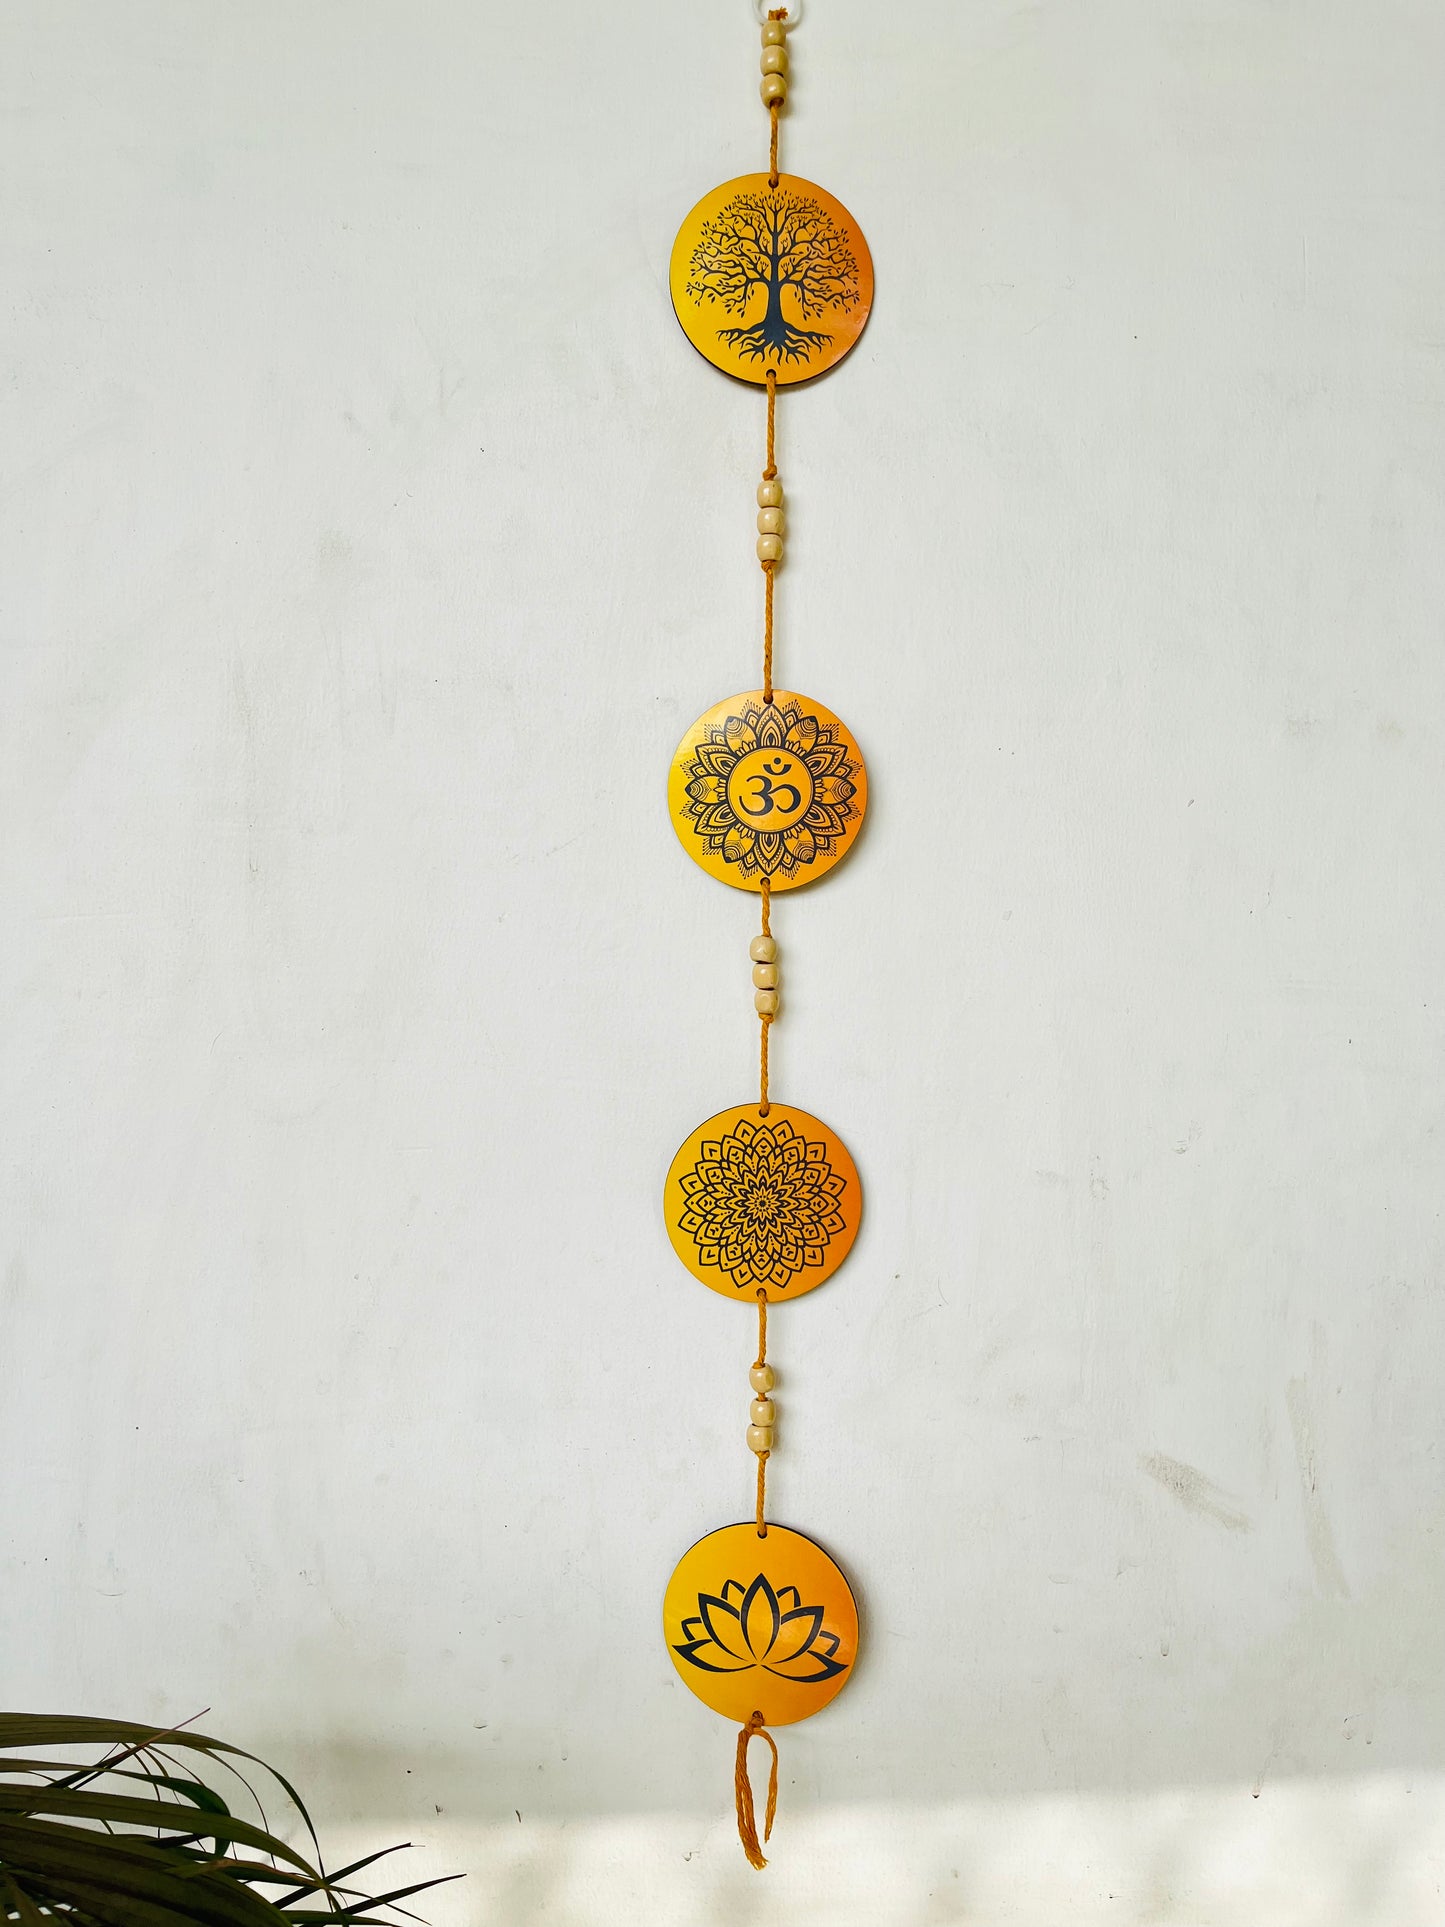 Akaar Decor's Symbolism & Quotational Wall Hanging for Home Decor- Powerful Symbols